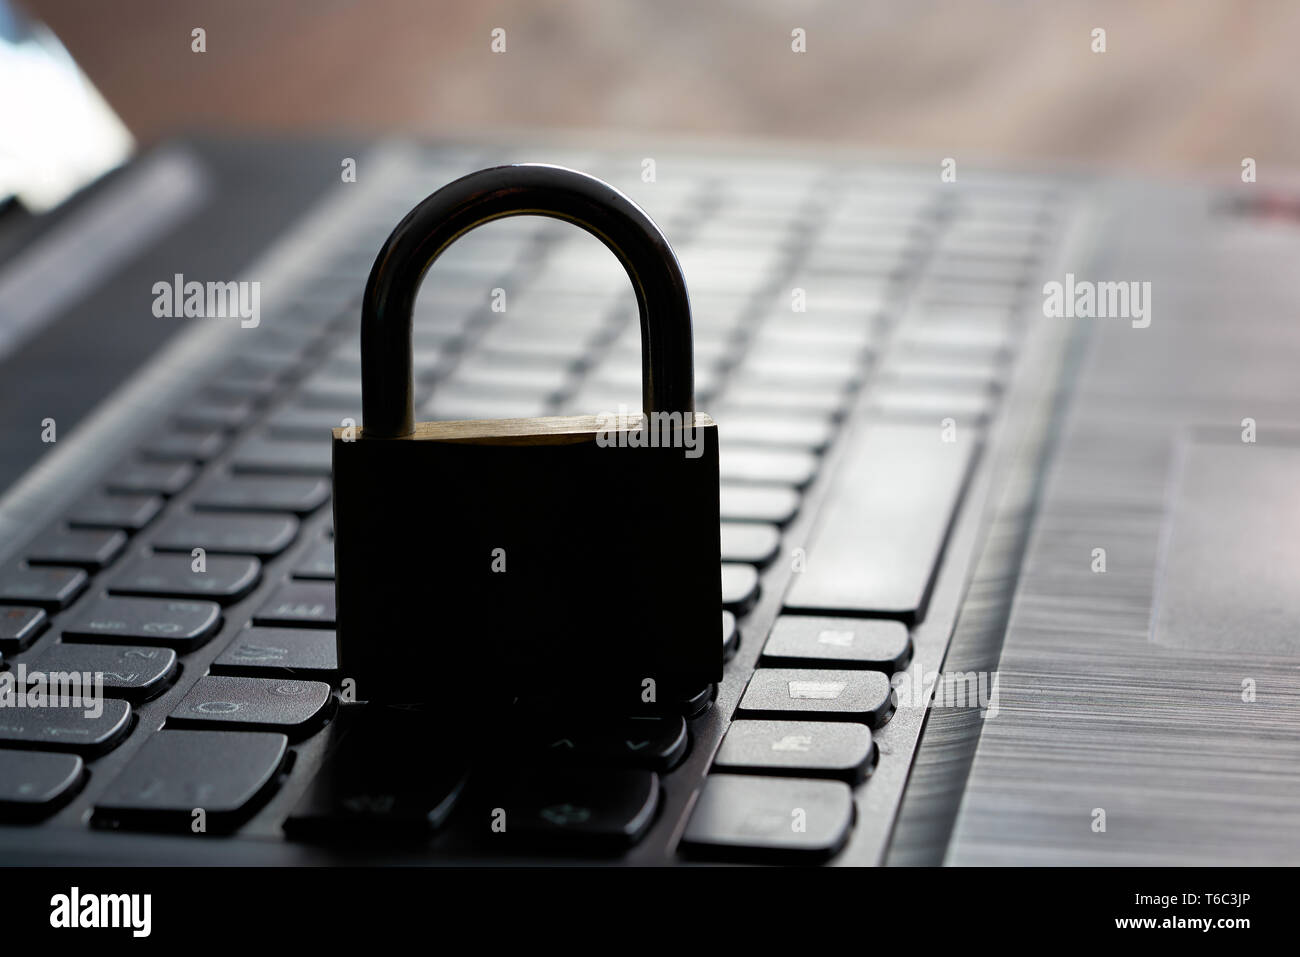 Computer keyboard and padlock as a symbol of Internet security Stock Photo